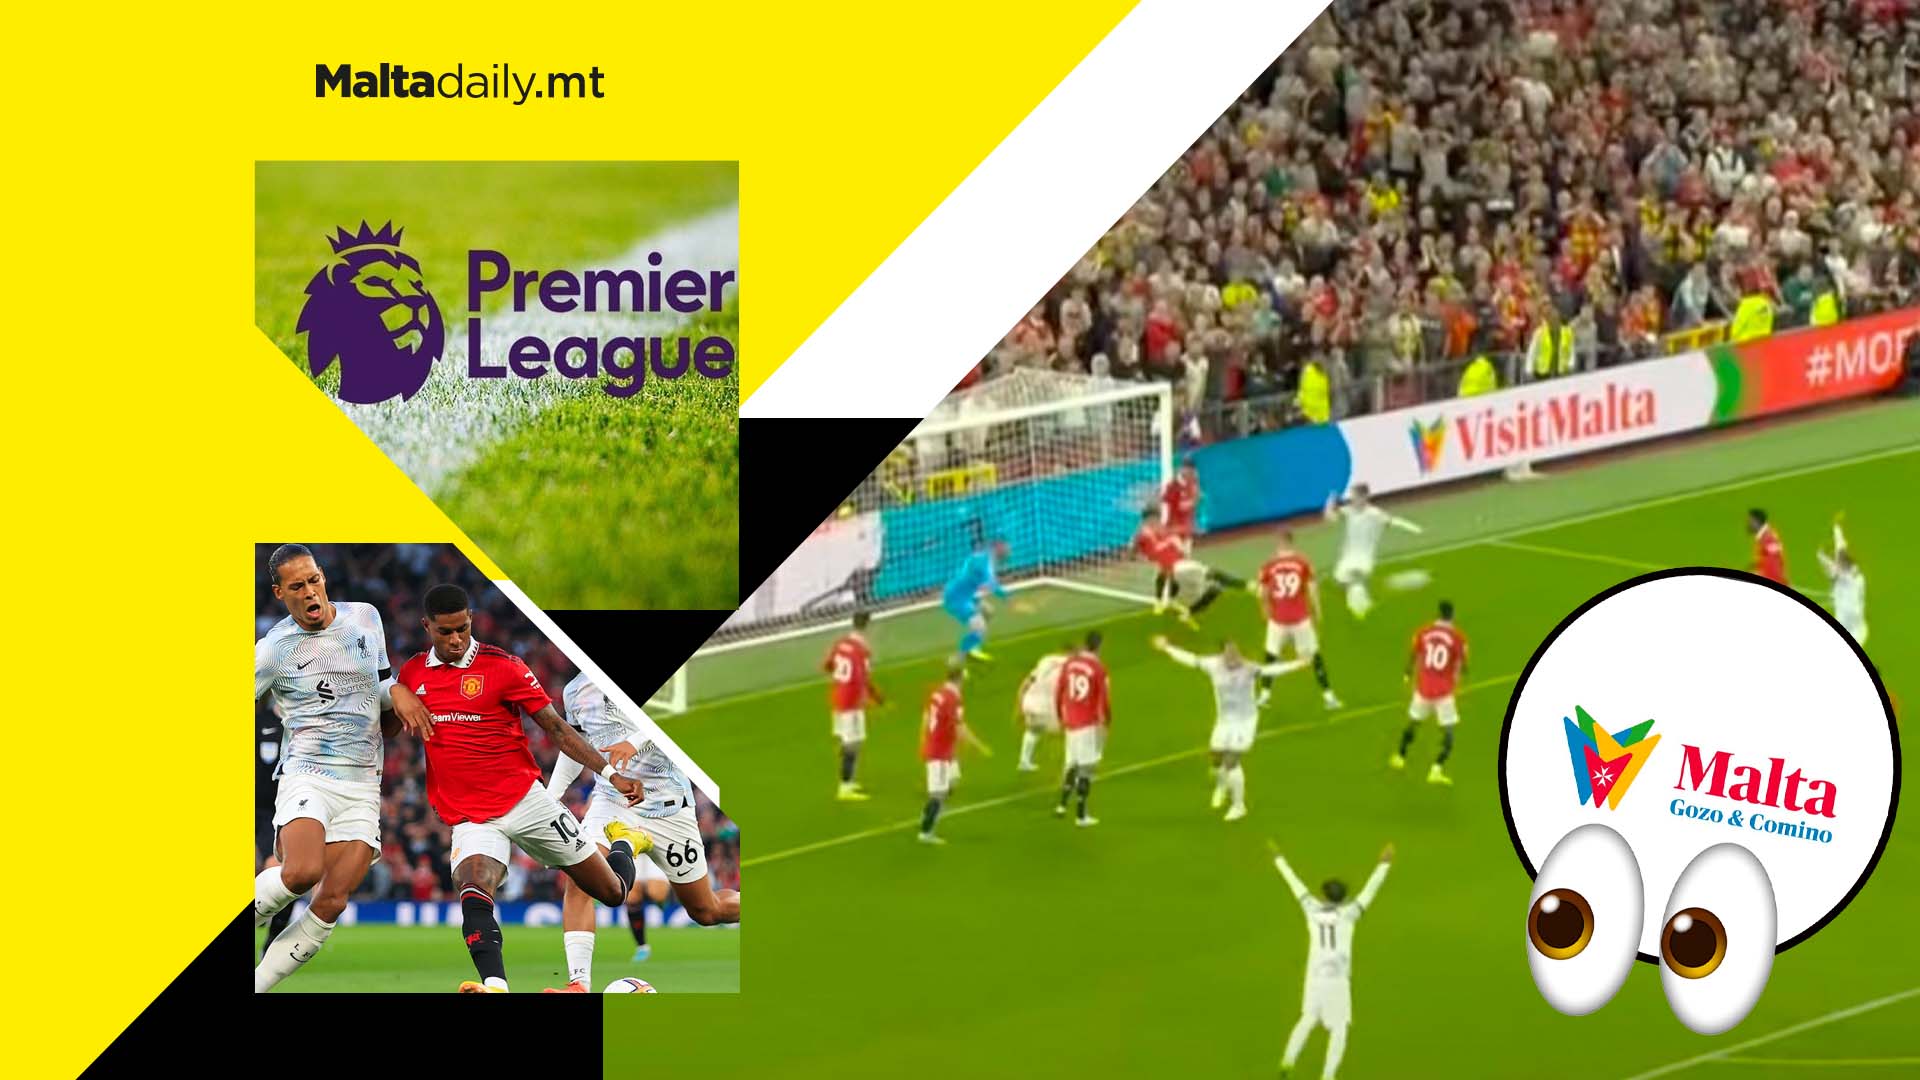 Visit Malta features during Manchester vs Liverpool match as millions watch